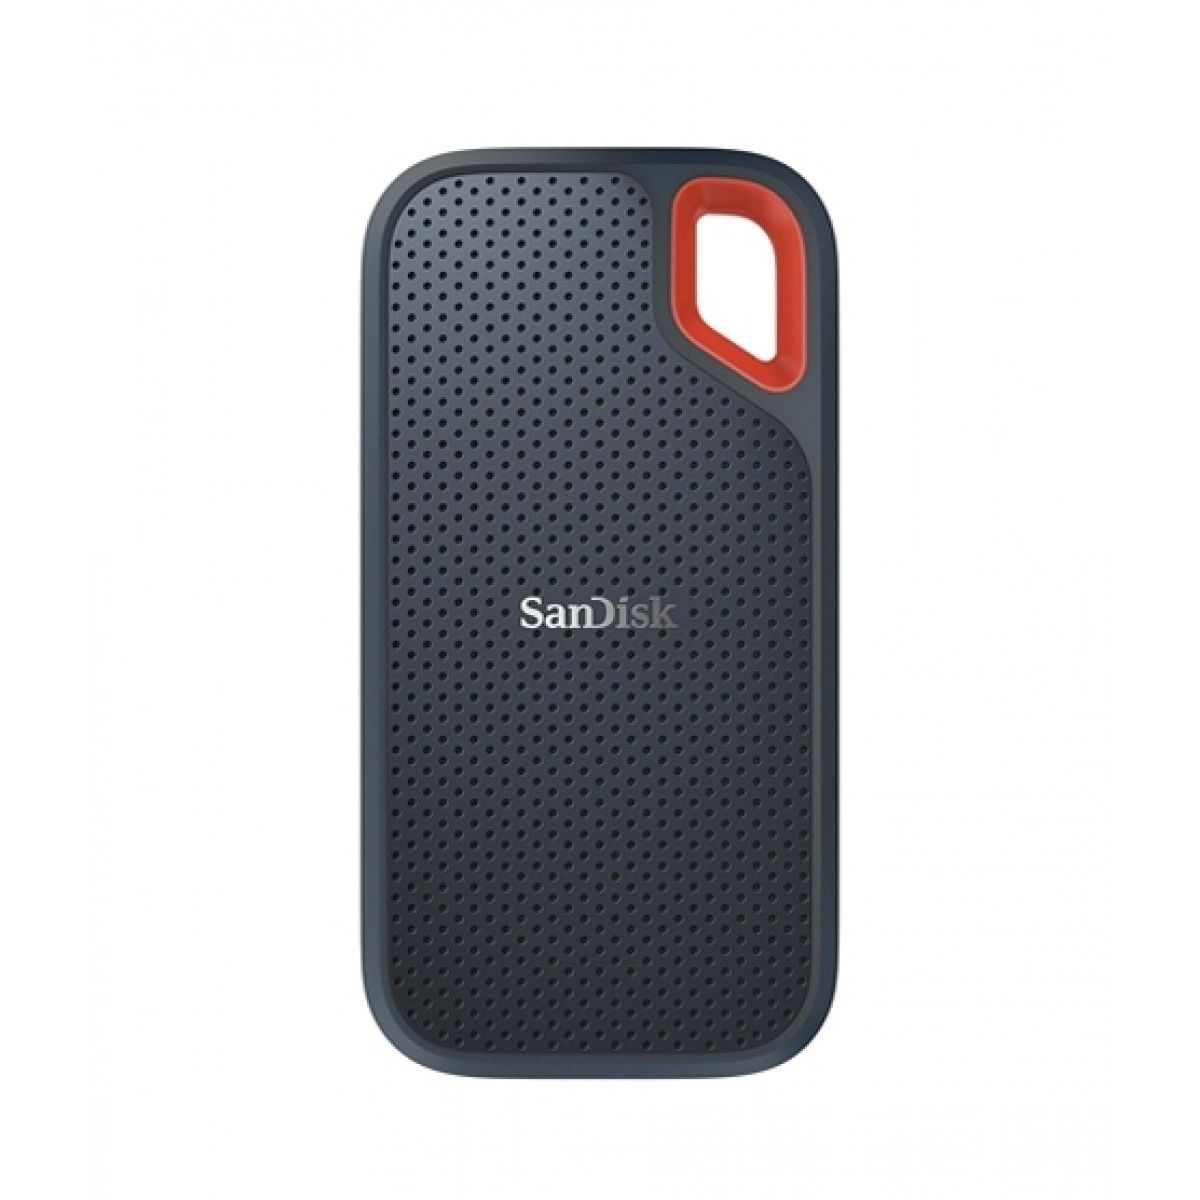 SanDisk Extreme 1 TB Portable Solid State Drive